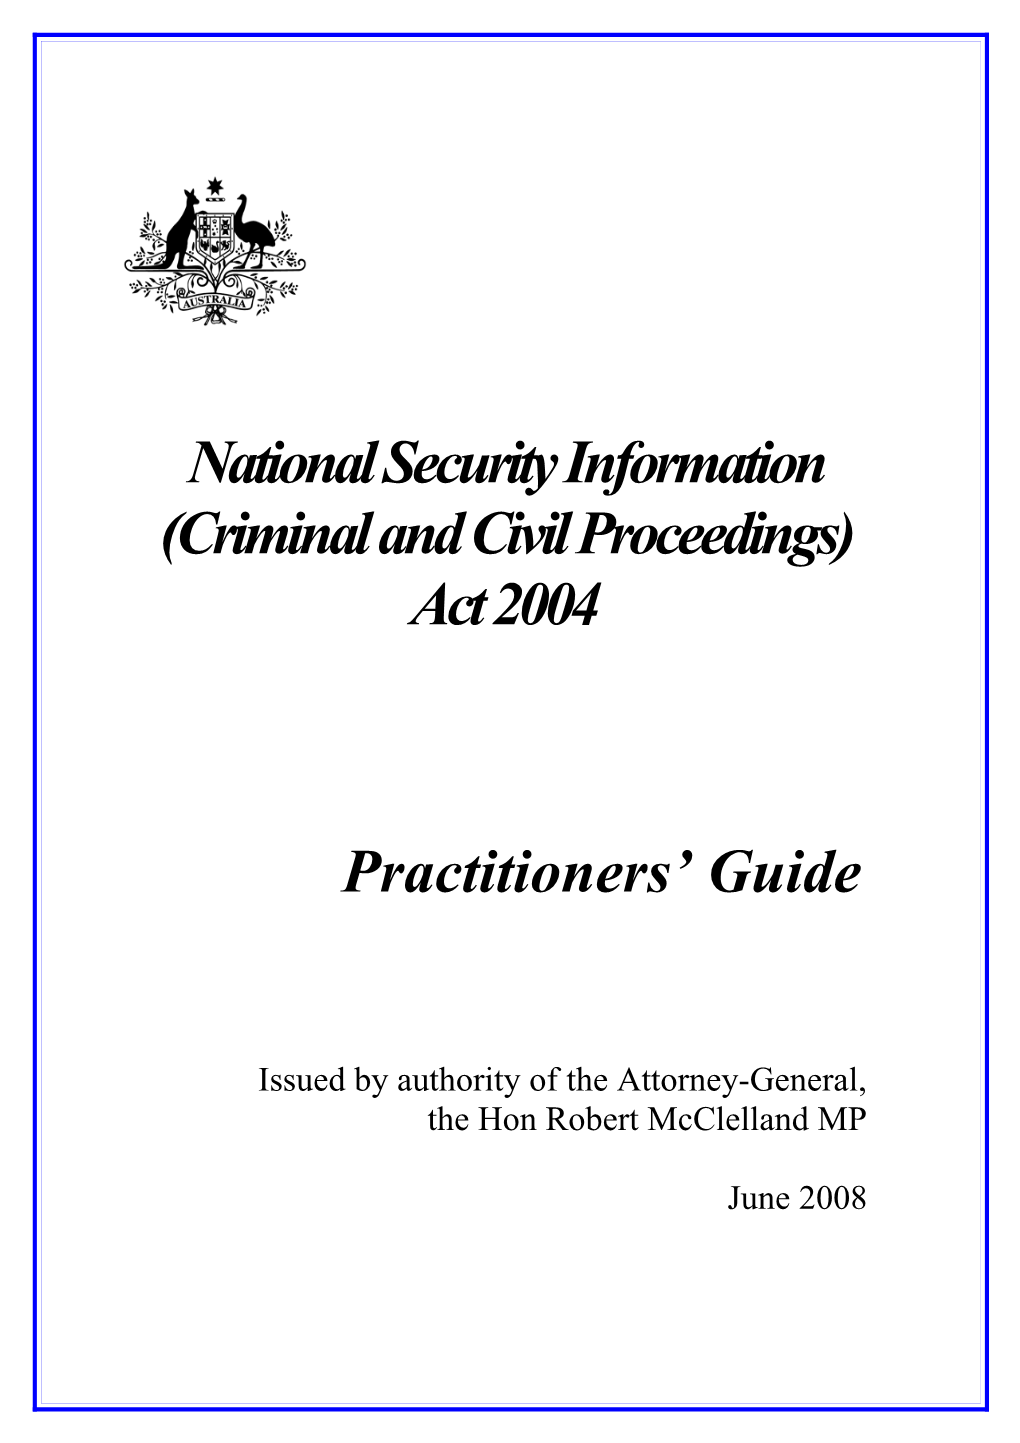 National Security Information (Criminal and Civil Proceedings) Act 2004